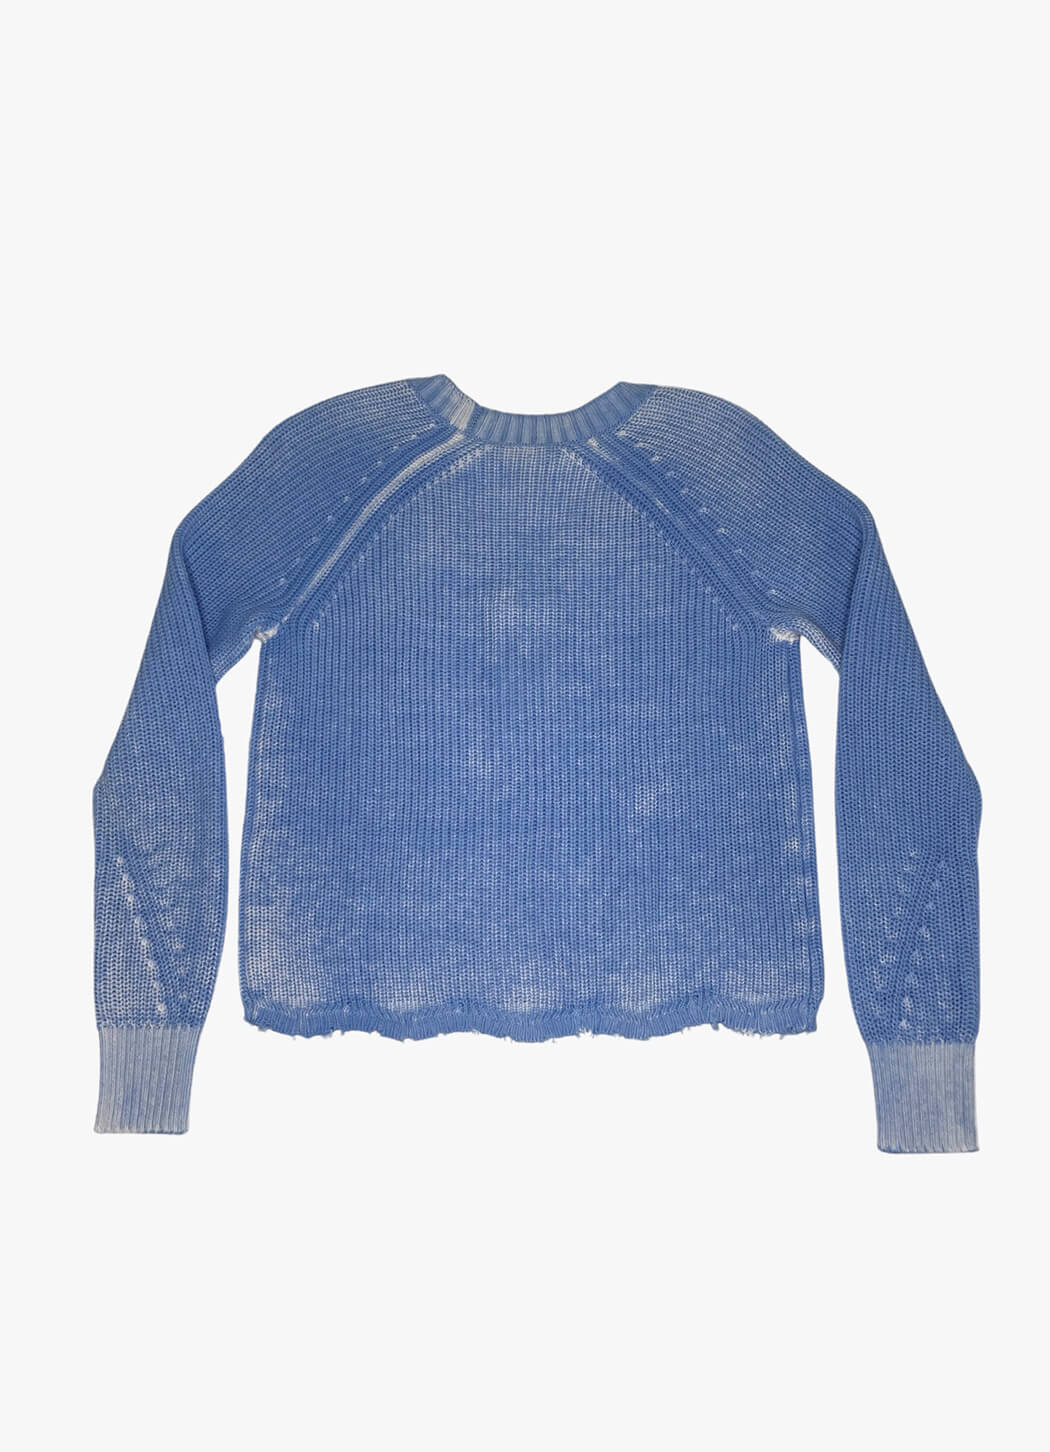 Autumn Cashmere Reversible Distressed Inked Scallop Shaker V